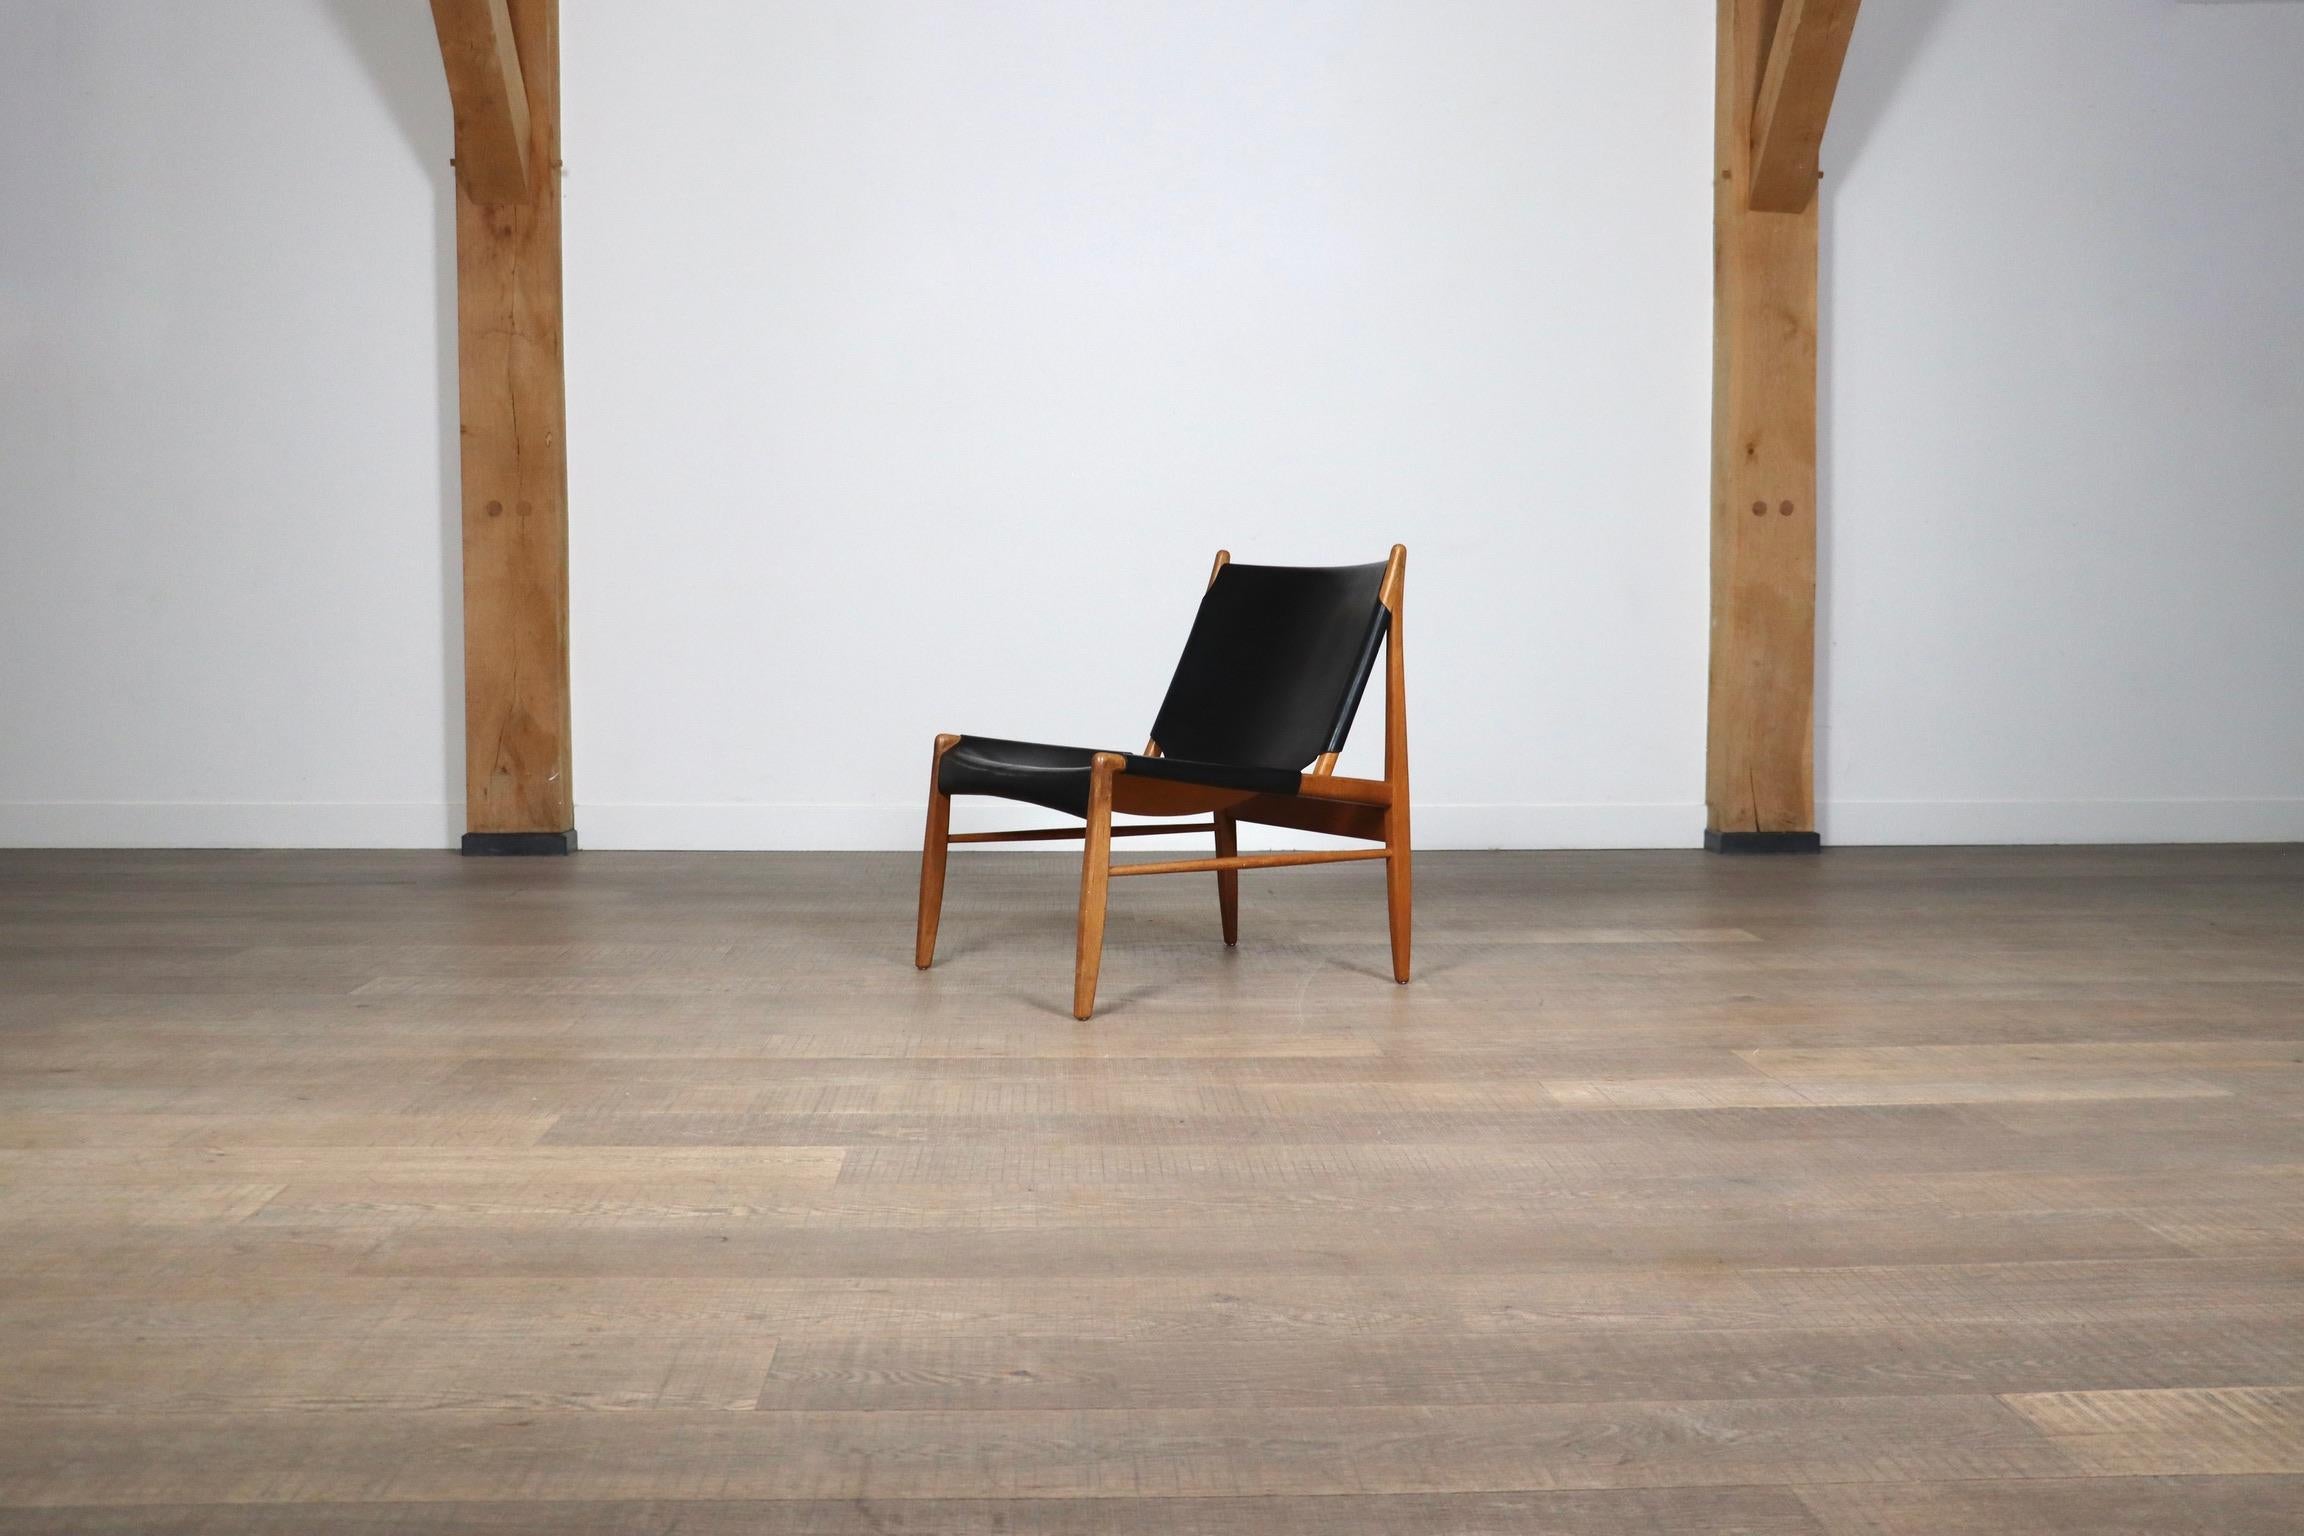 Fantastic Model 1192 “Chimney” lounge chair by Franz Xaver Lutz for WK Möbel, 1958. This beautiful edition in solid oak frame with a nice very lightly overal patinated black saddle leather seating is a nice timeless combination of fine minimalism. A